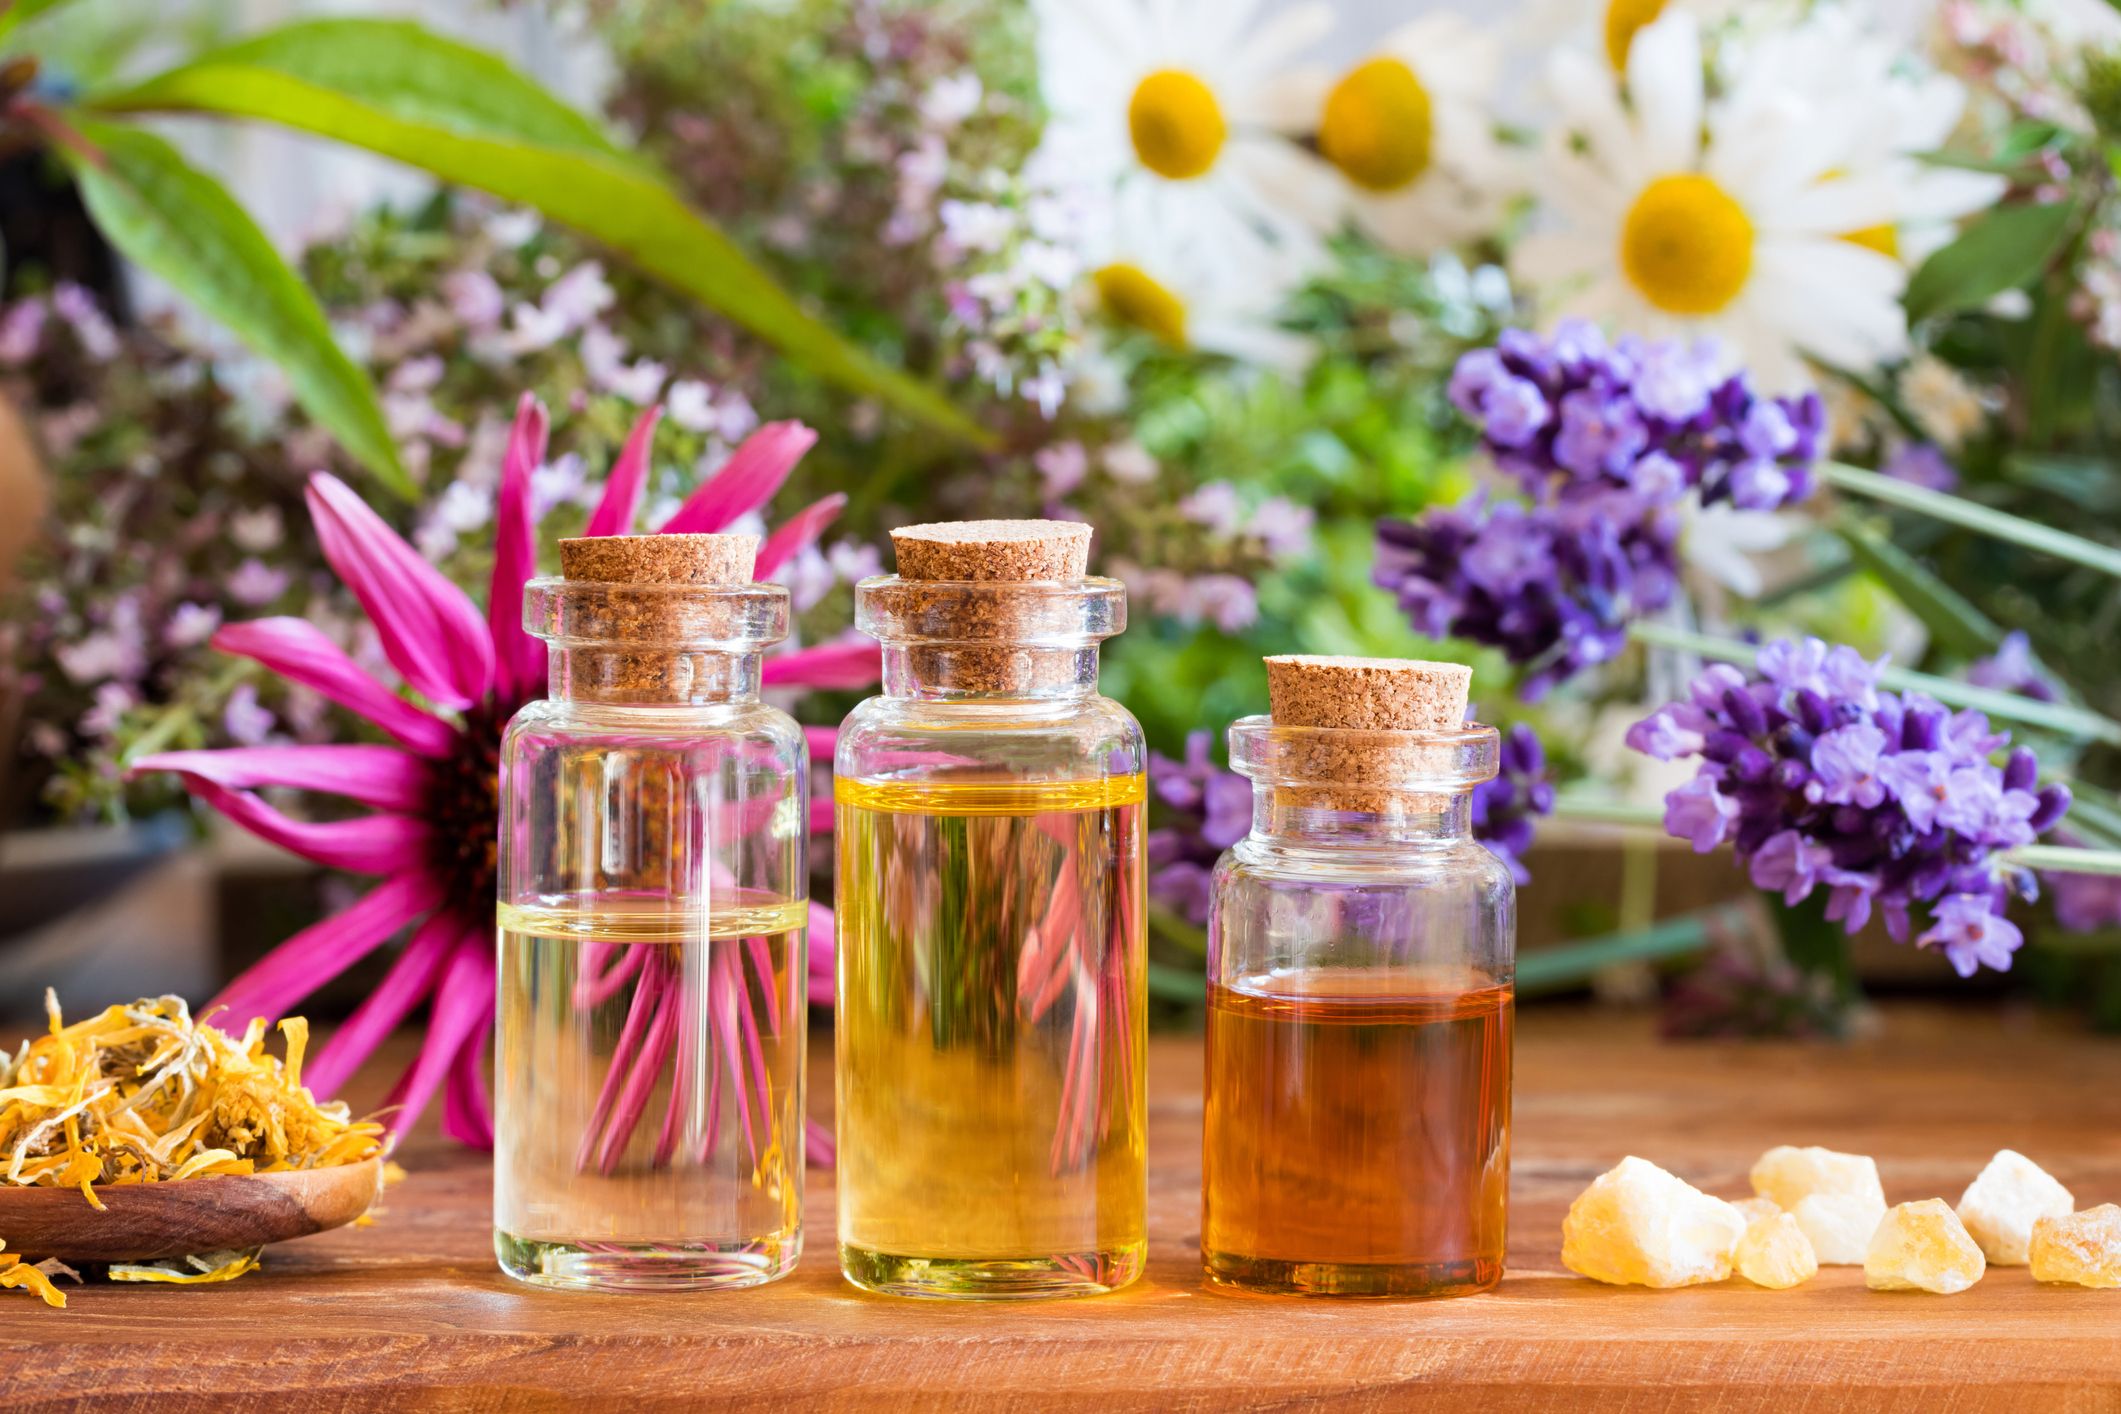 Best Essential Oils For Maximum Health and Wellness